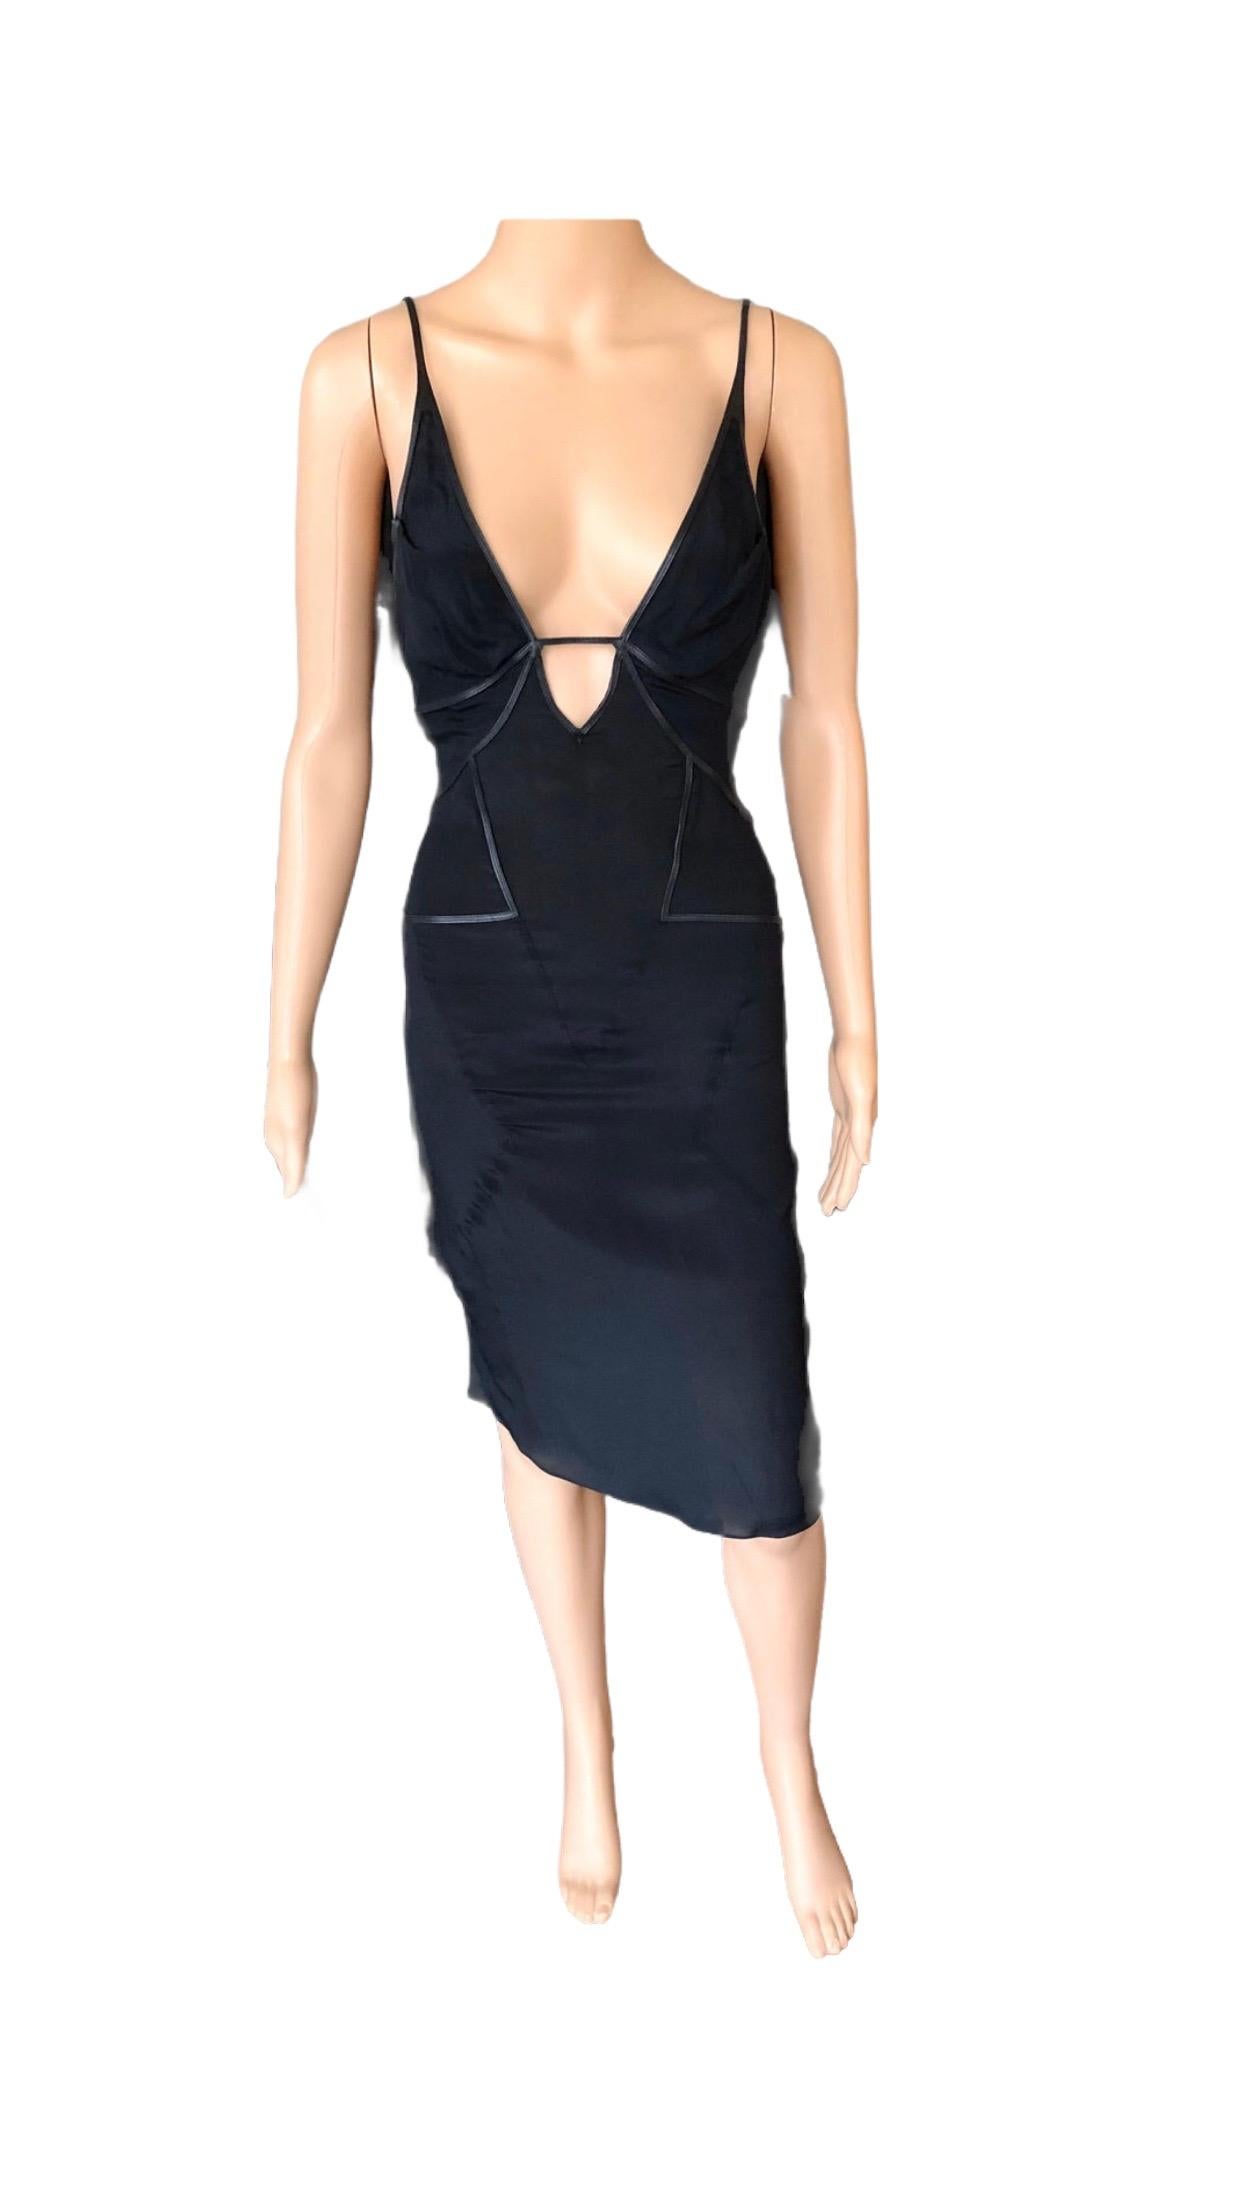 Gucci by Tom Ford S/S 2004 Cutout Plunged Neckline Black Dress For Sale 6